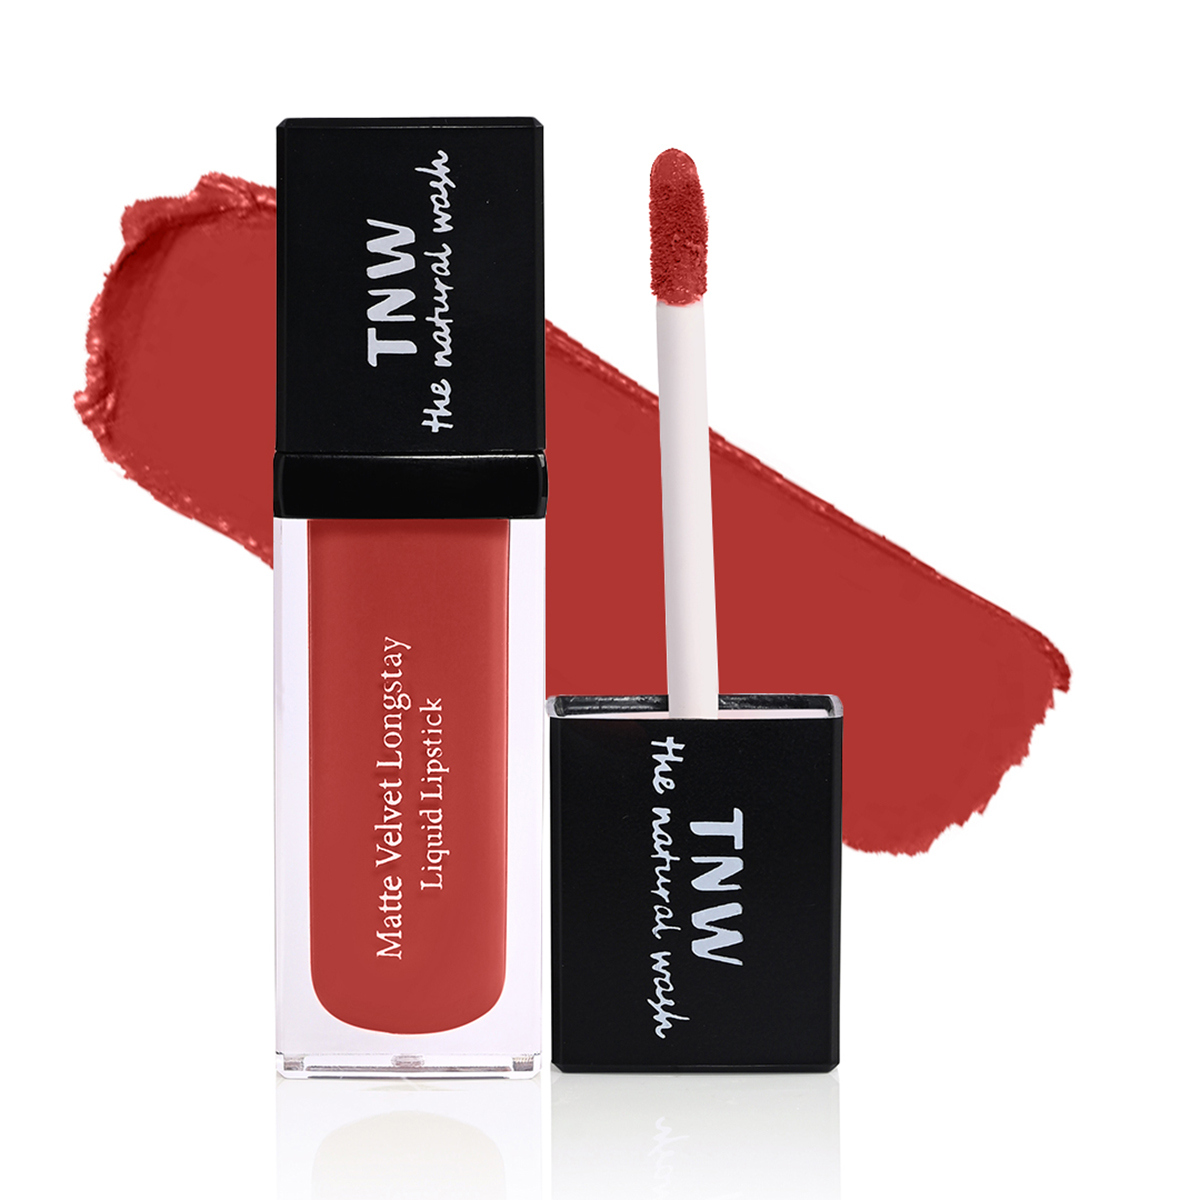 TNW - The Natural Wash Matte Velvet Longstay Liquid Lipstick, 02 - Spicy Coral - Coral Nude, 5ml